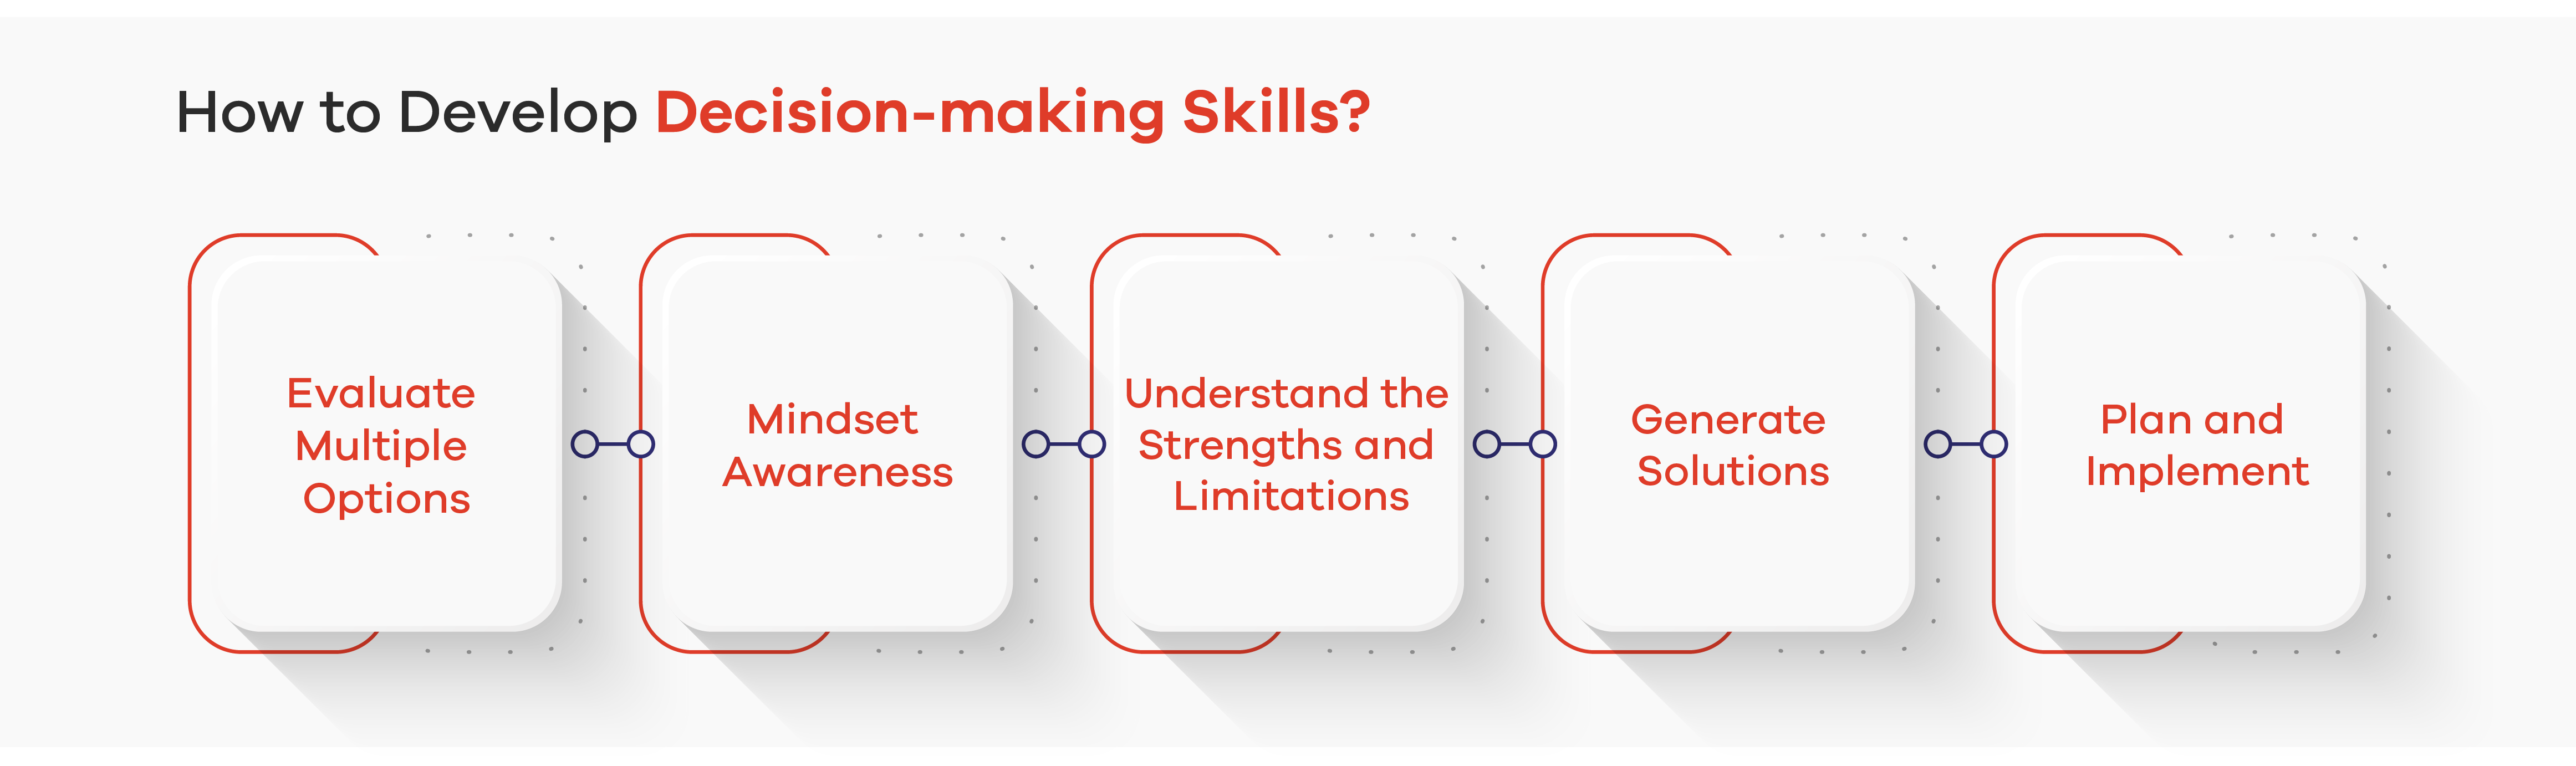 How to Develop Decision-making Skills